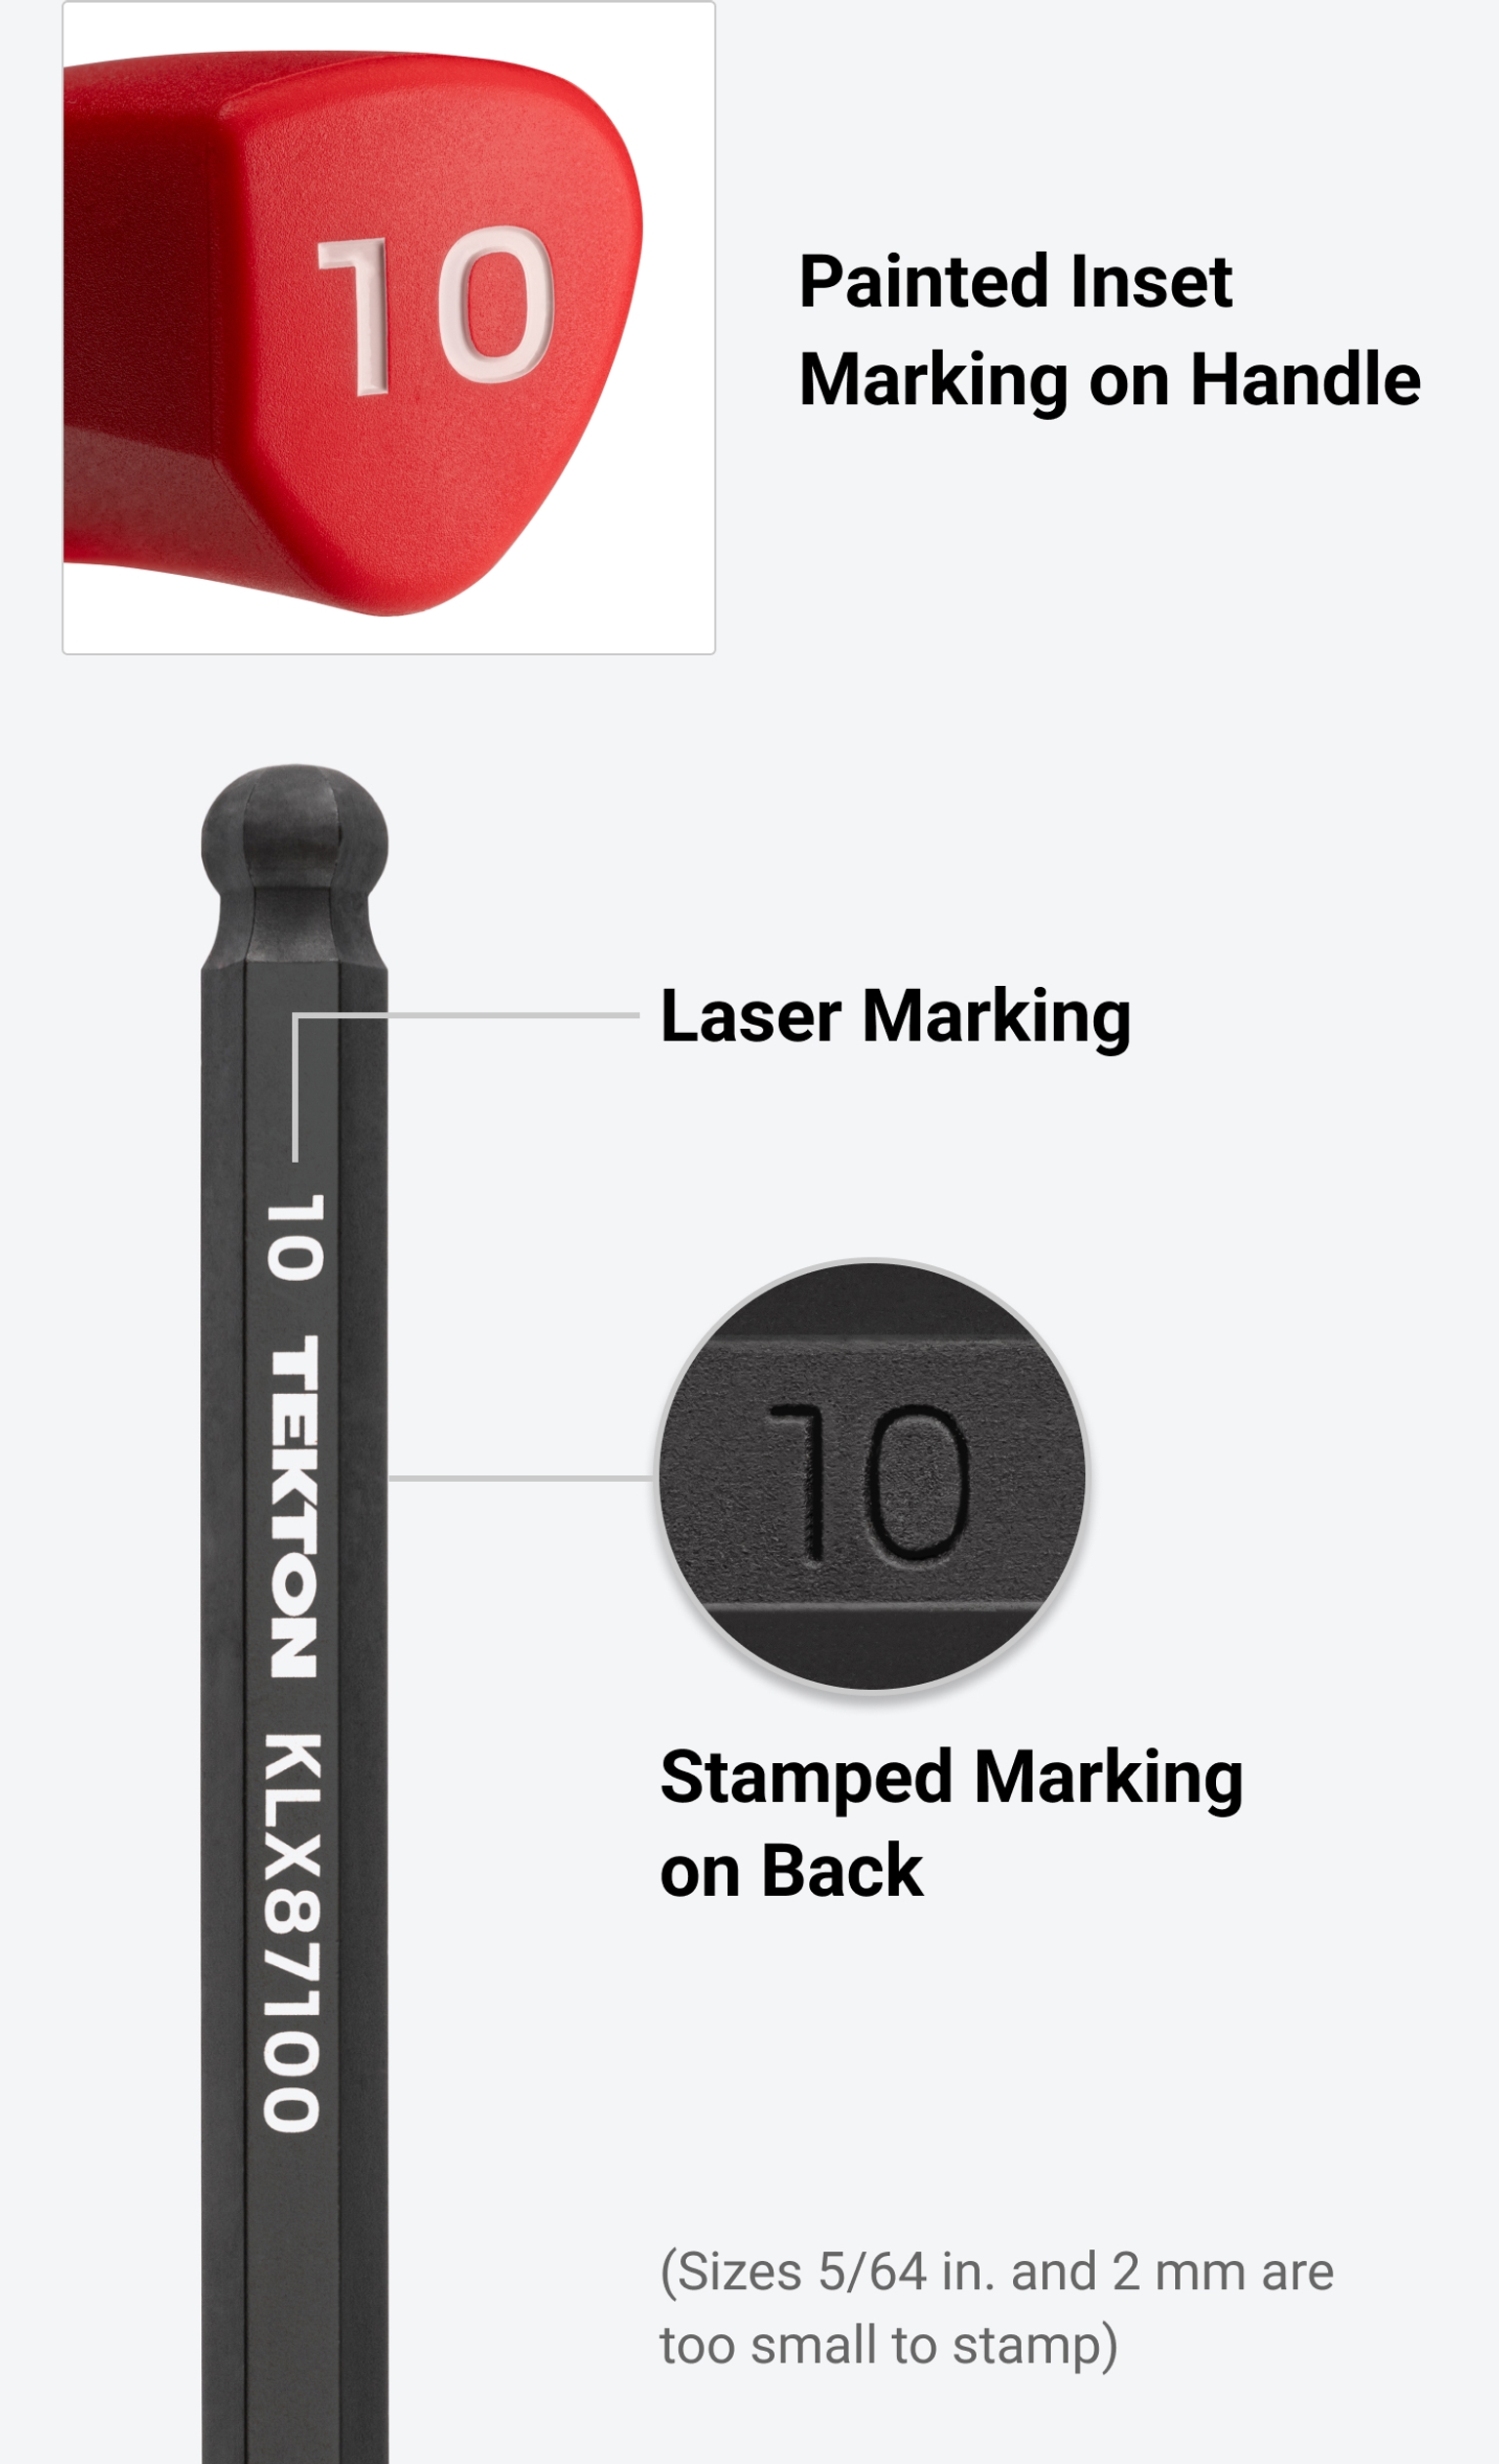 Tekton's T-handle ball end hex key with painted inset marking, laser marking, and stamped sizes